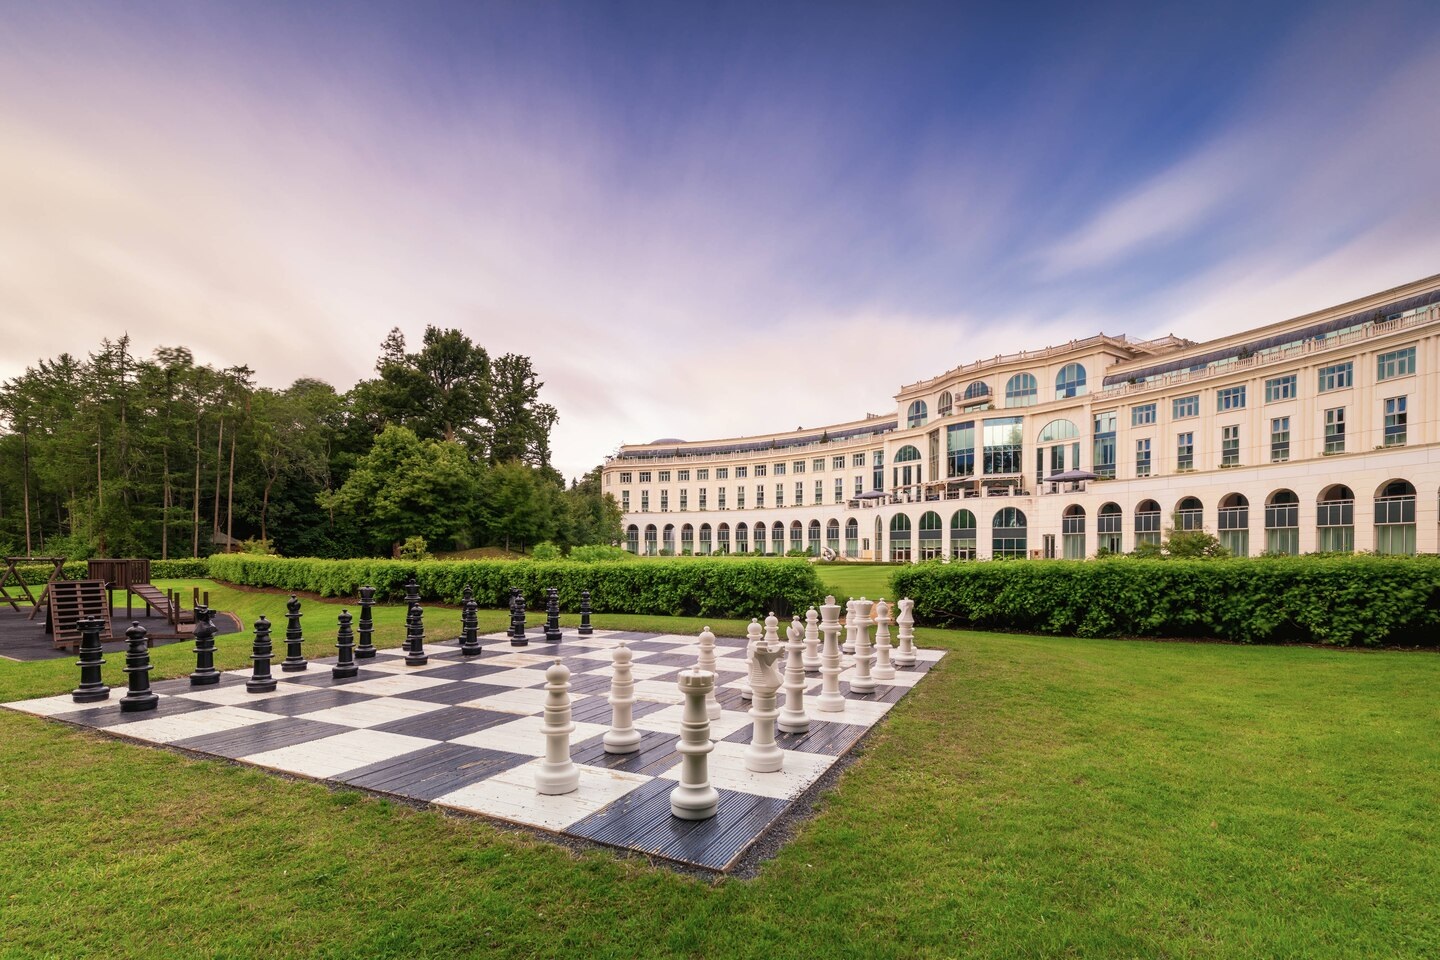 a large chess board in a grassy area with a large building in the background